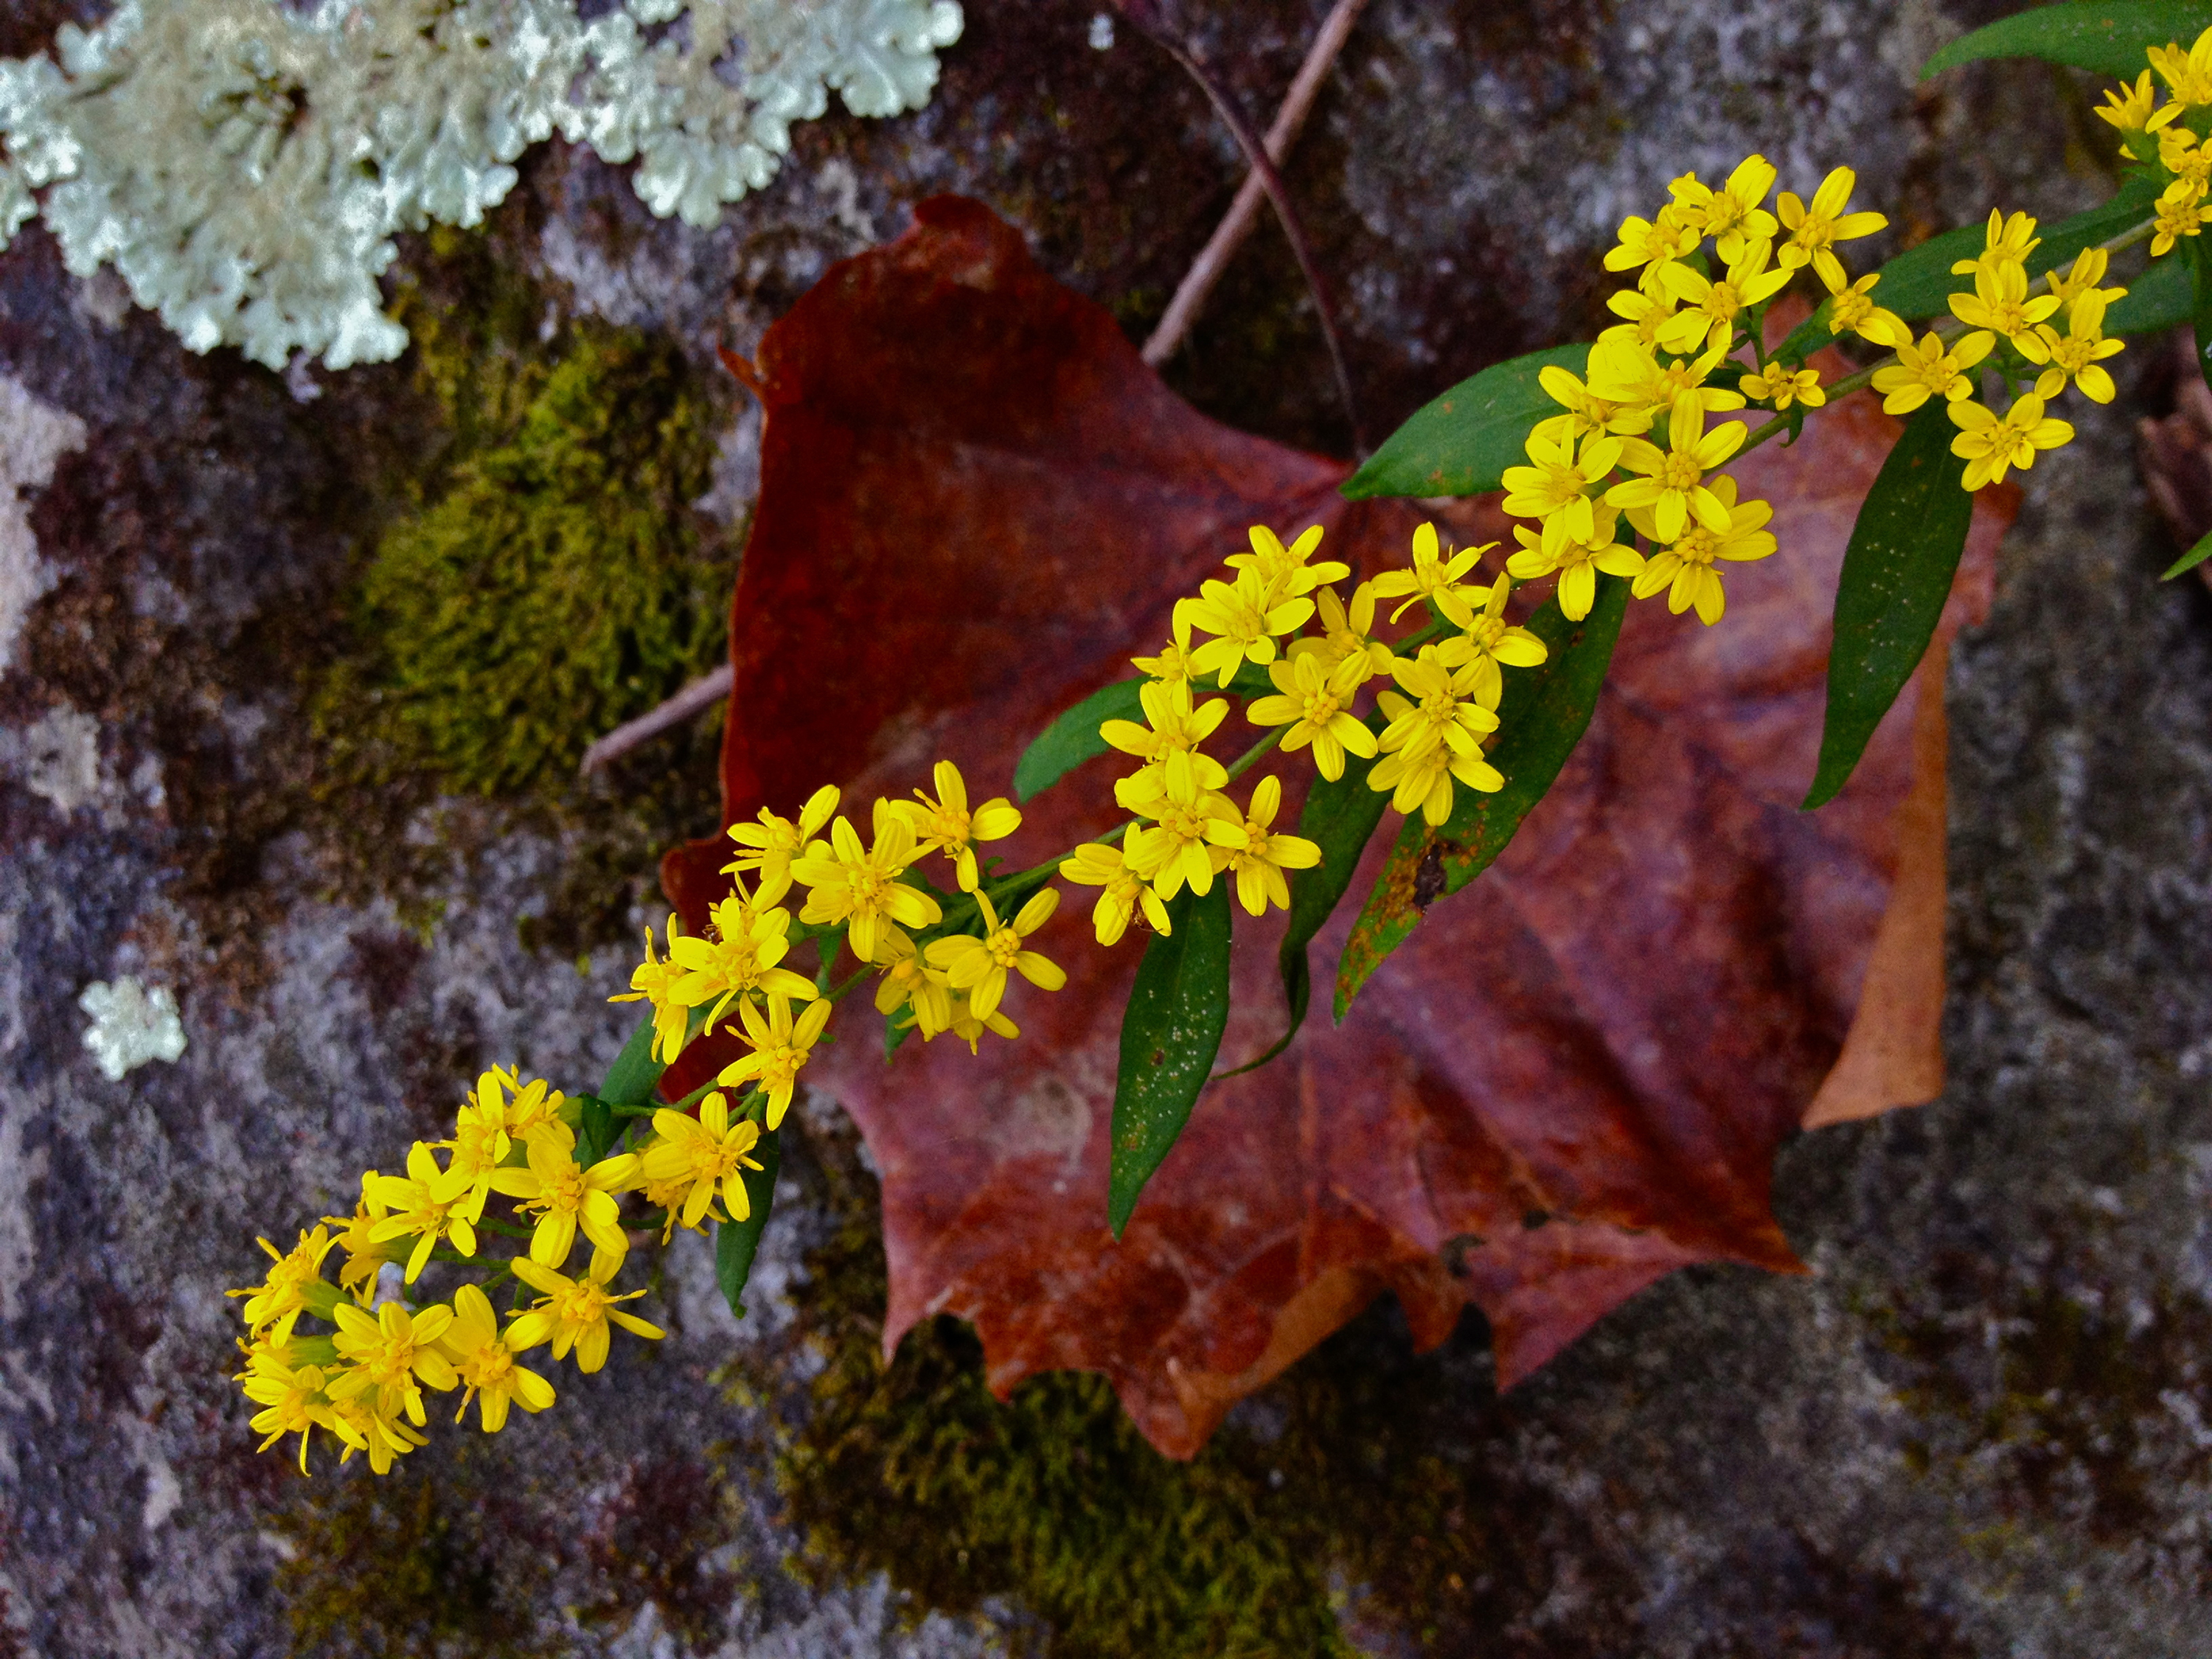 A thin branch is studded with small yellow flowers. The branch extends over a rocky patch of lichen-covered ground.